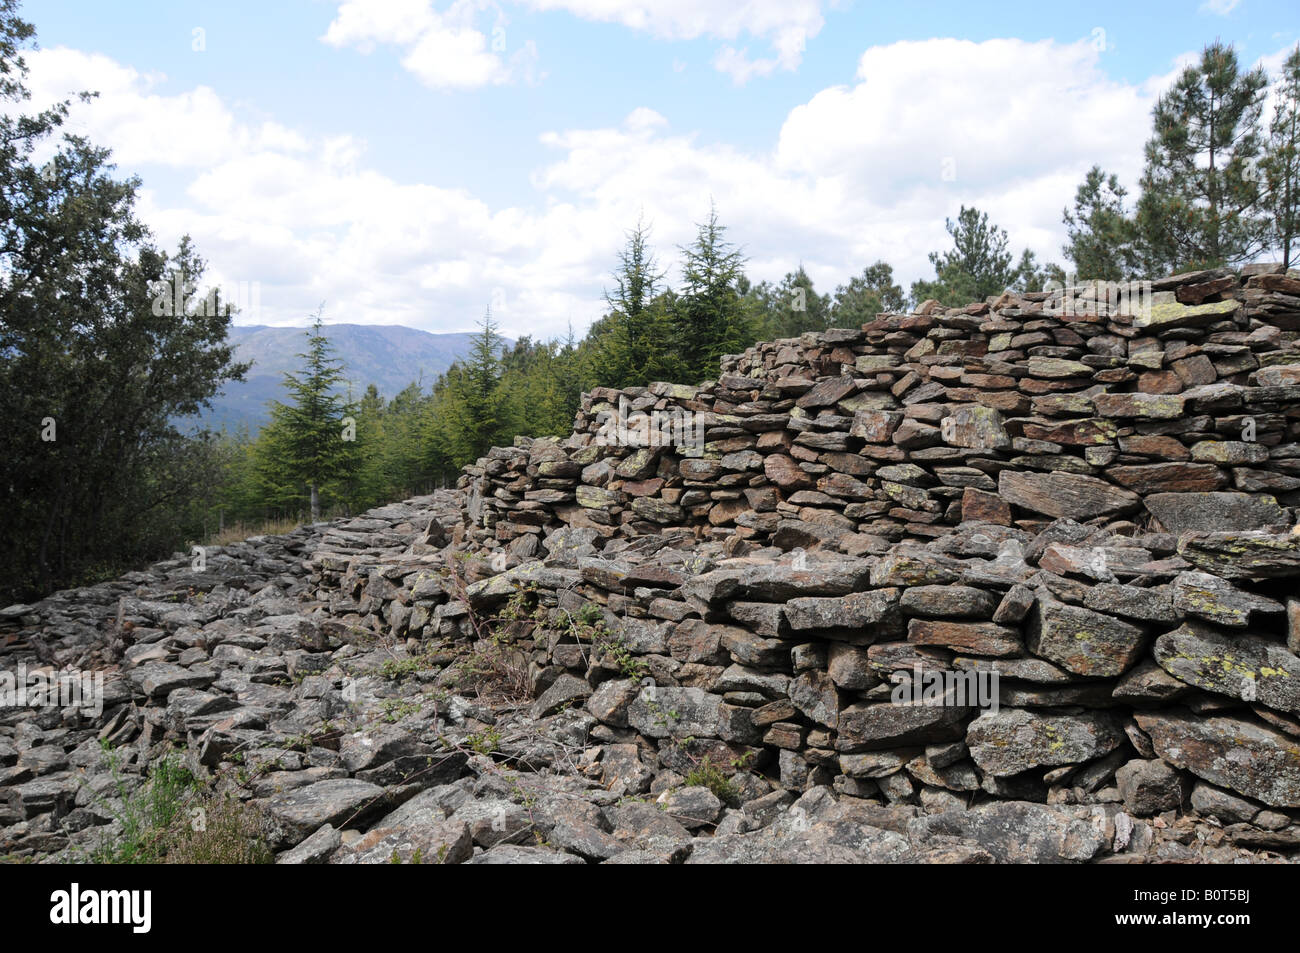 The late Bronze Age tumulus at Elzière in the Cévennes region of Southern France. Stock Photo